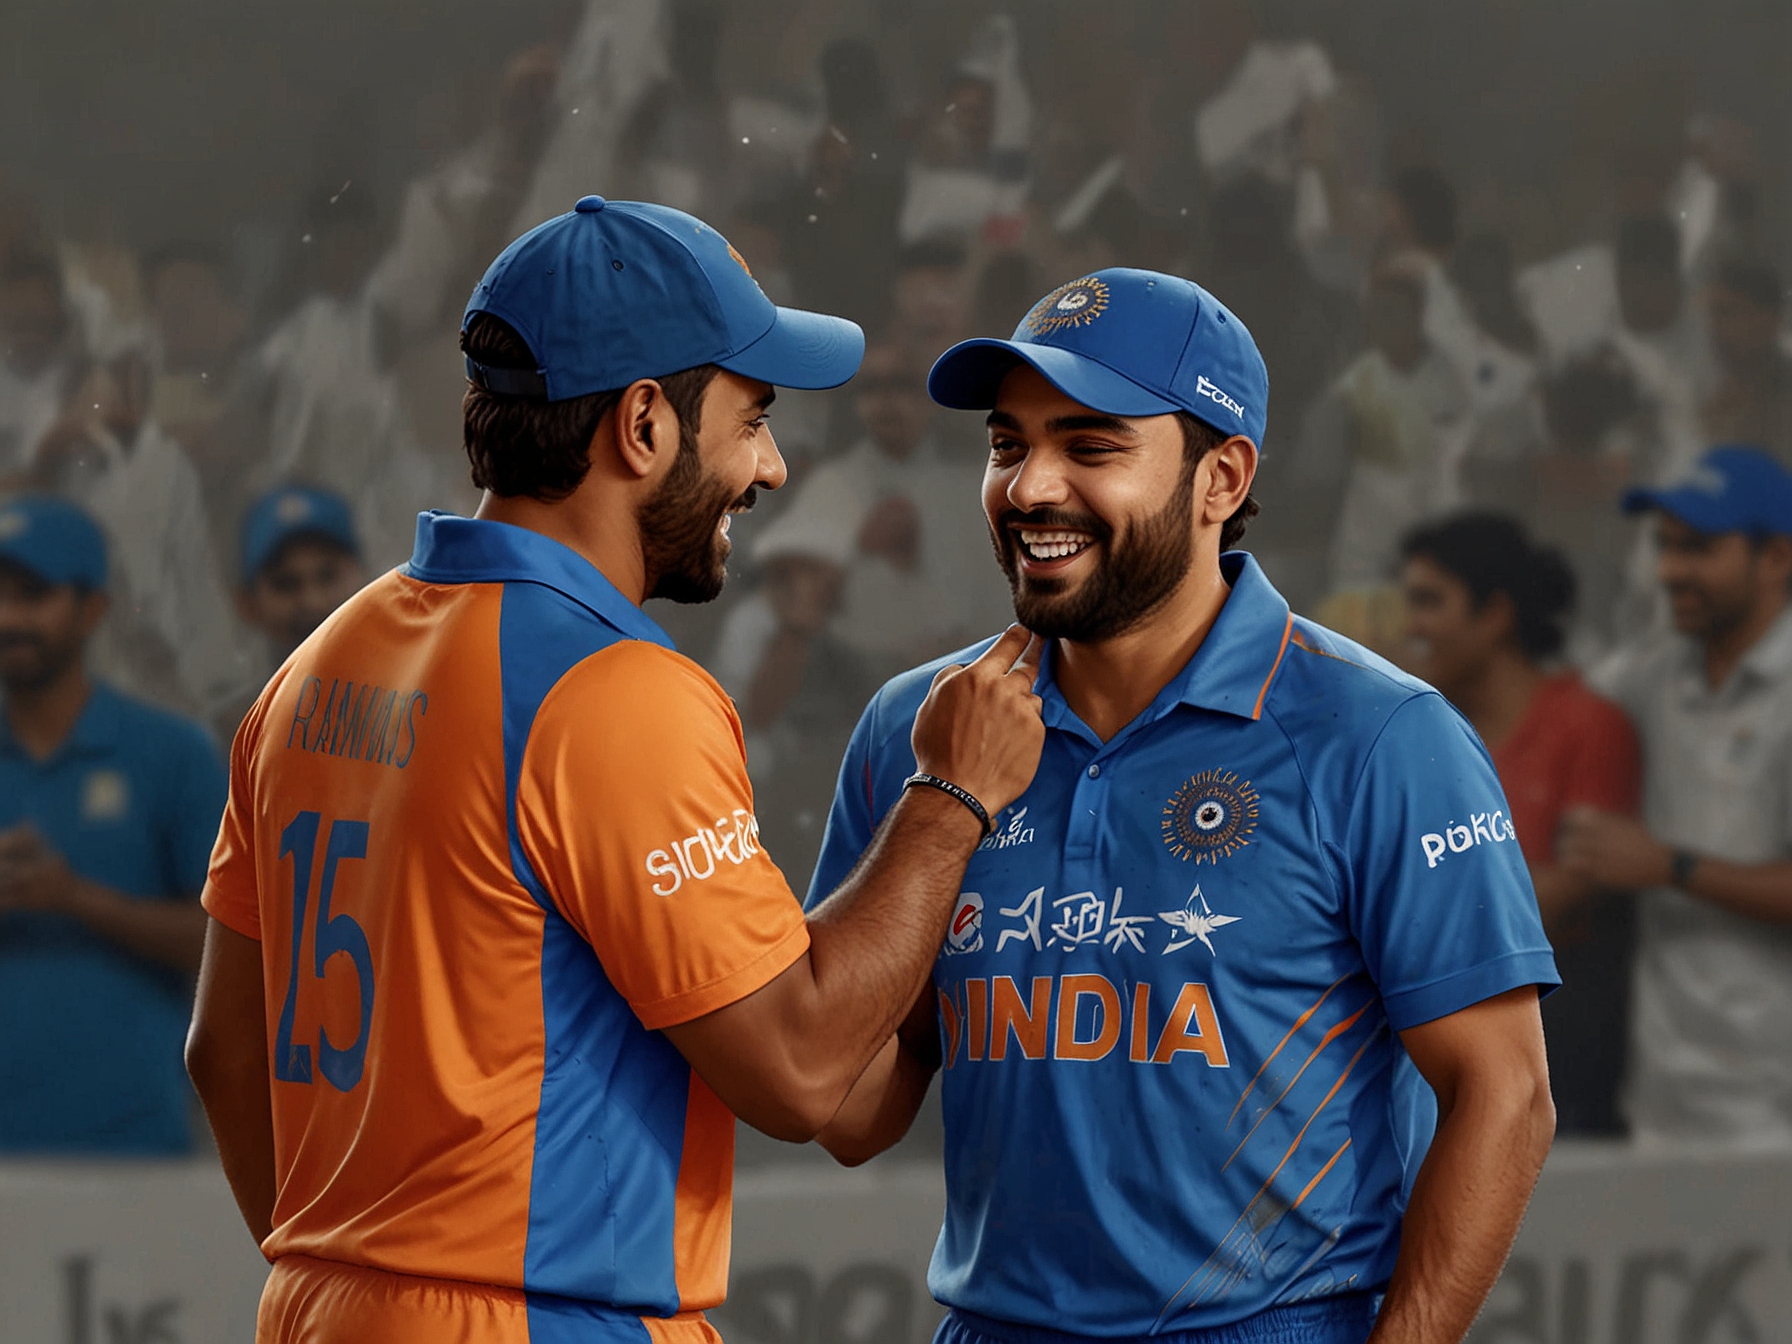 Rashid Khan and Rohit Sharma sharing a candid moment, smiling and expressing relief and joy after qualifying for the semifinals, as fans celebrate in the background.